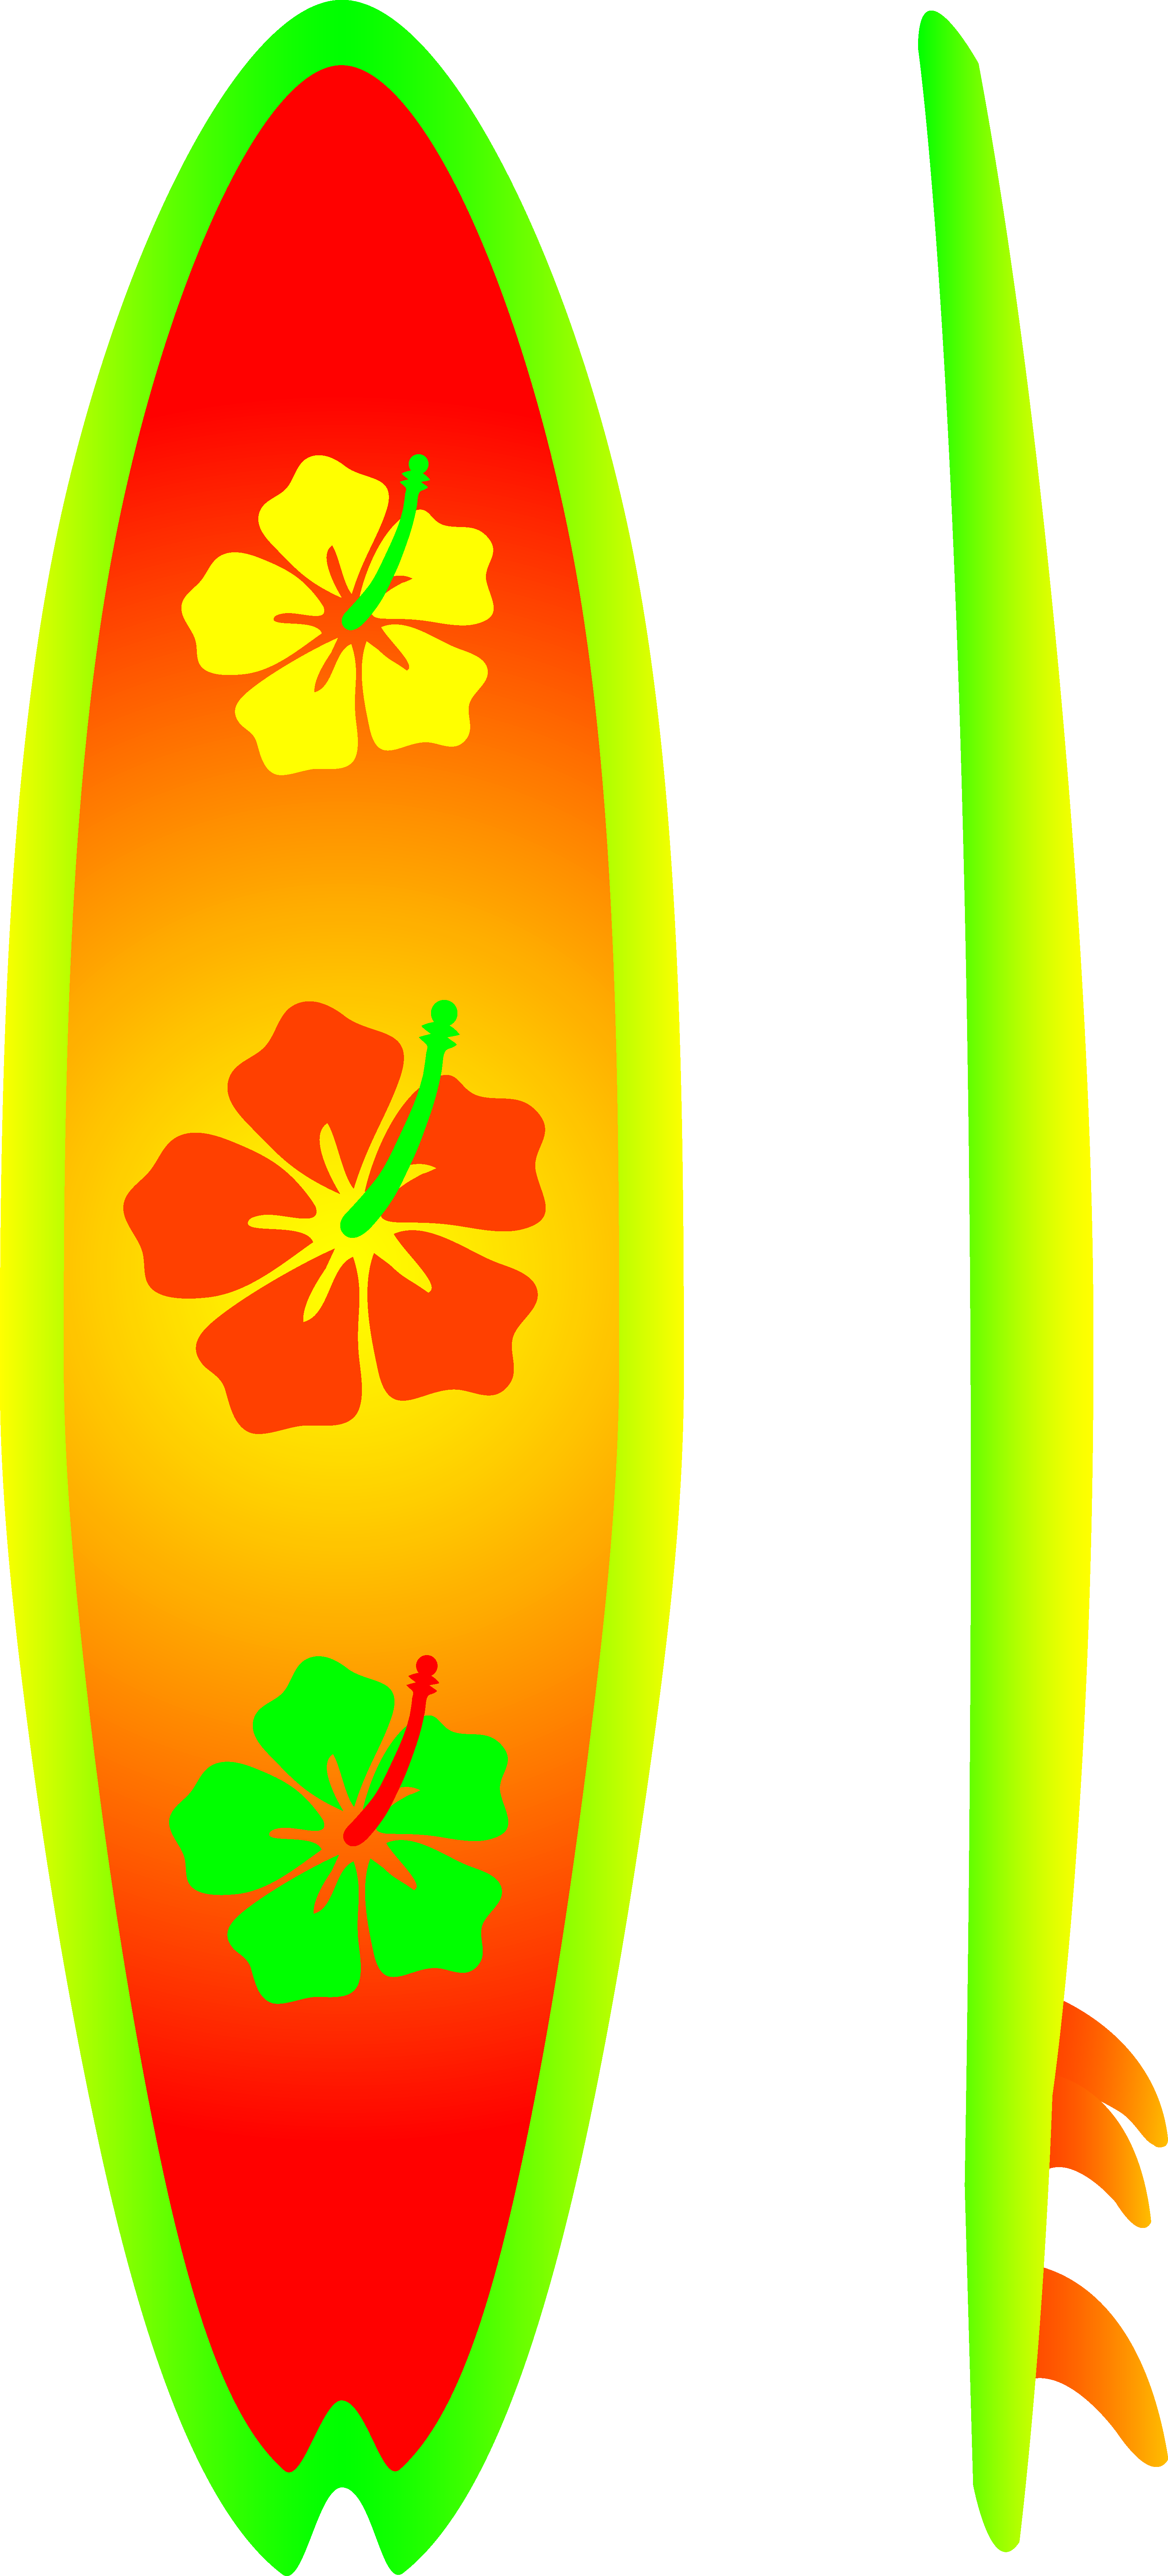 Neon Surfboard With Hibiscus Design - Free Clip Art